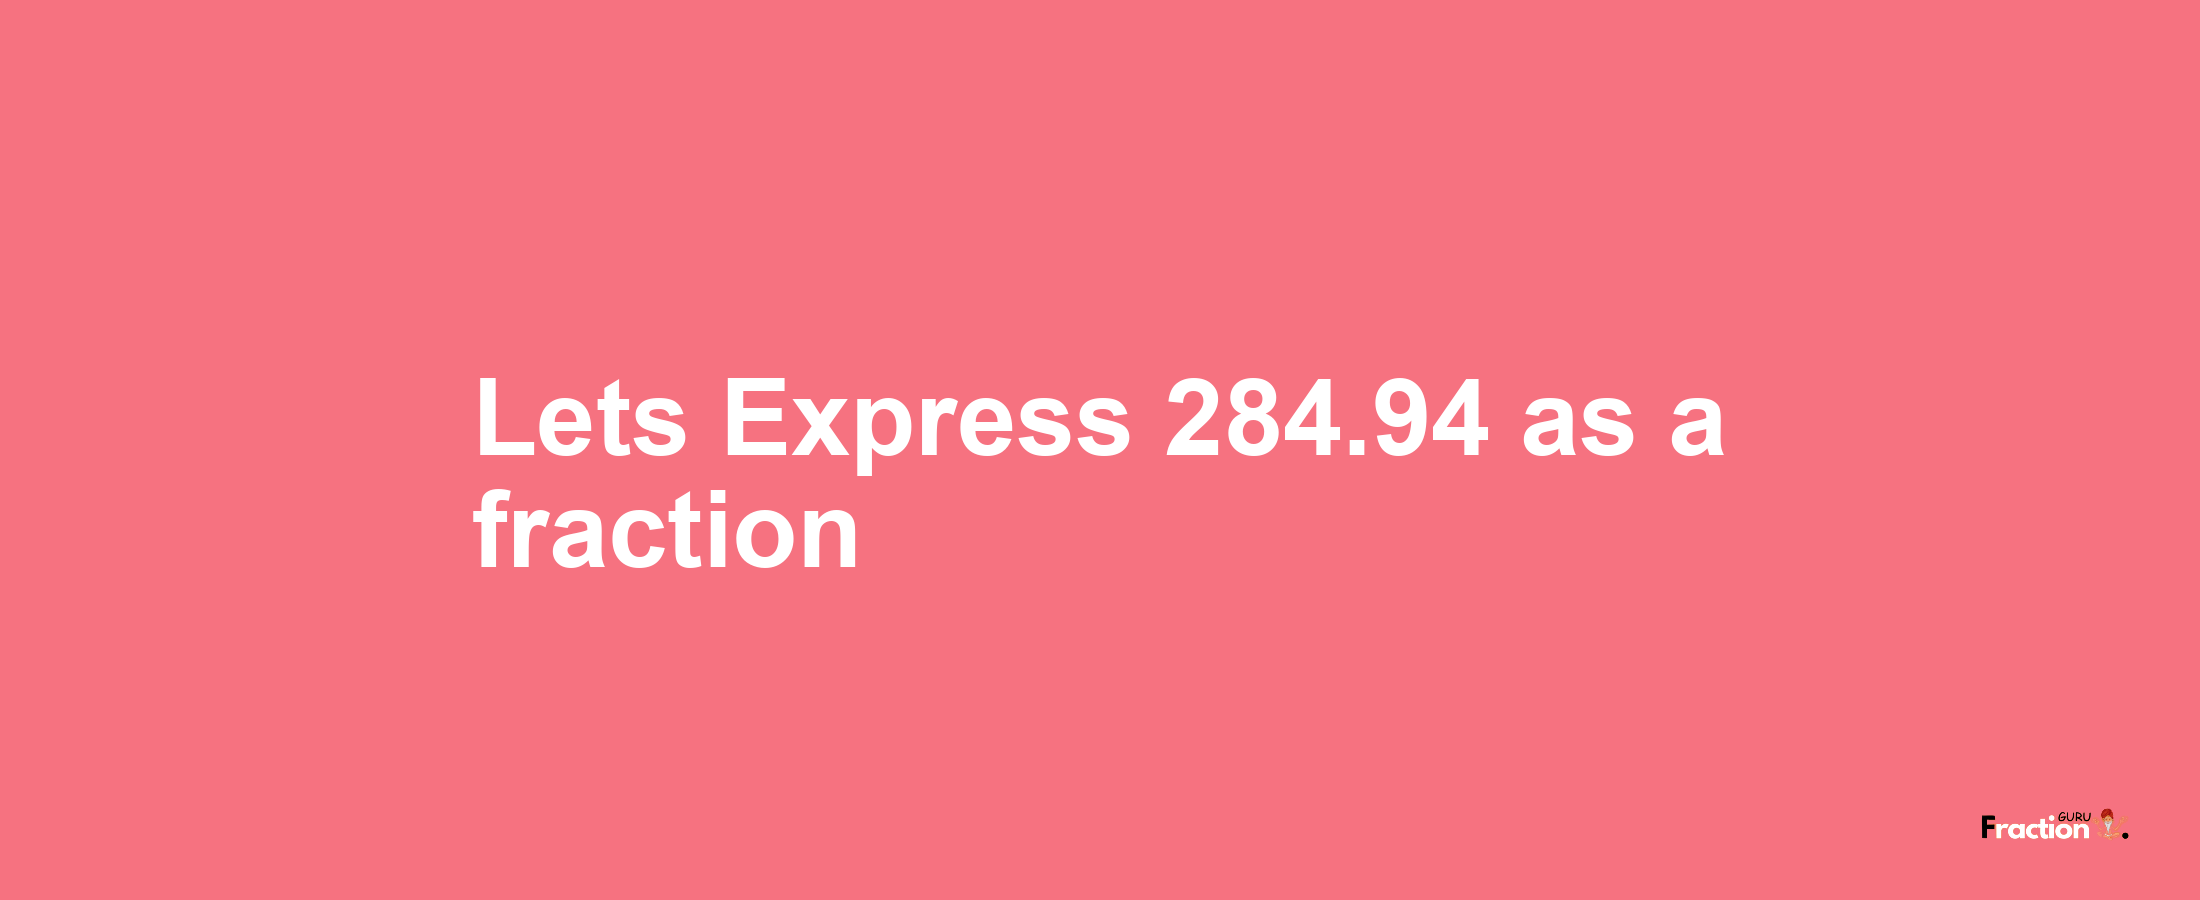 Lets Express 284.94 as afraction